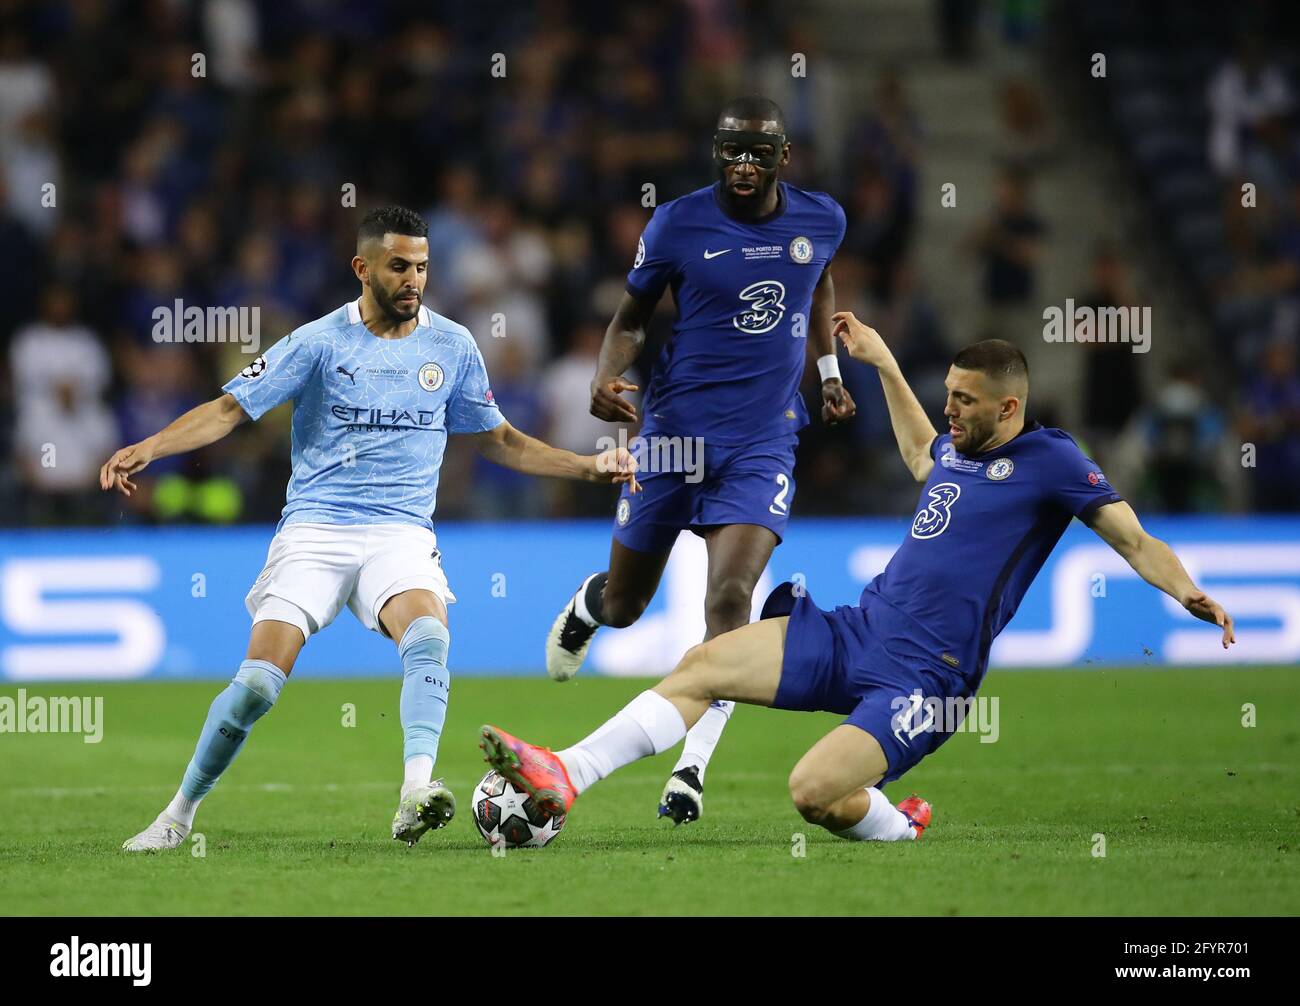 Porto, Portugal, 29th May 2021. Riyad Marhez of Manchester City skips through a tackle by Mateo Kovacic of Chelsea during the UEFA Champions League match at the Estadio do Dragao, Porto. Picture credit should read: David Klein / Sportimage Stock Photo